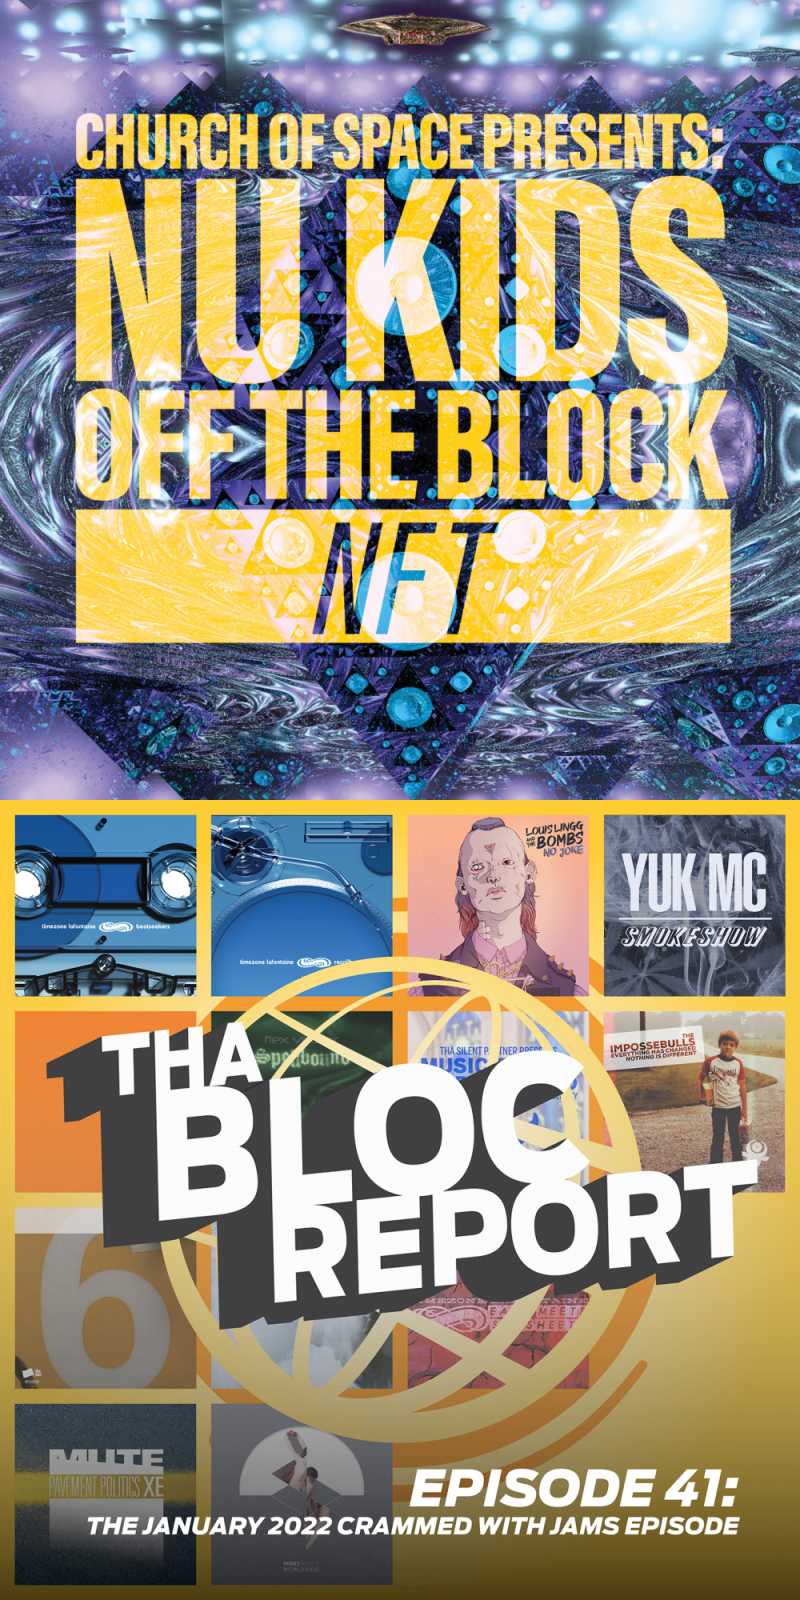 Cover of “NFT” by Church of Space Presents: Nu Kids Off The Block and image representing Episode 41 of Tha Bloc Report